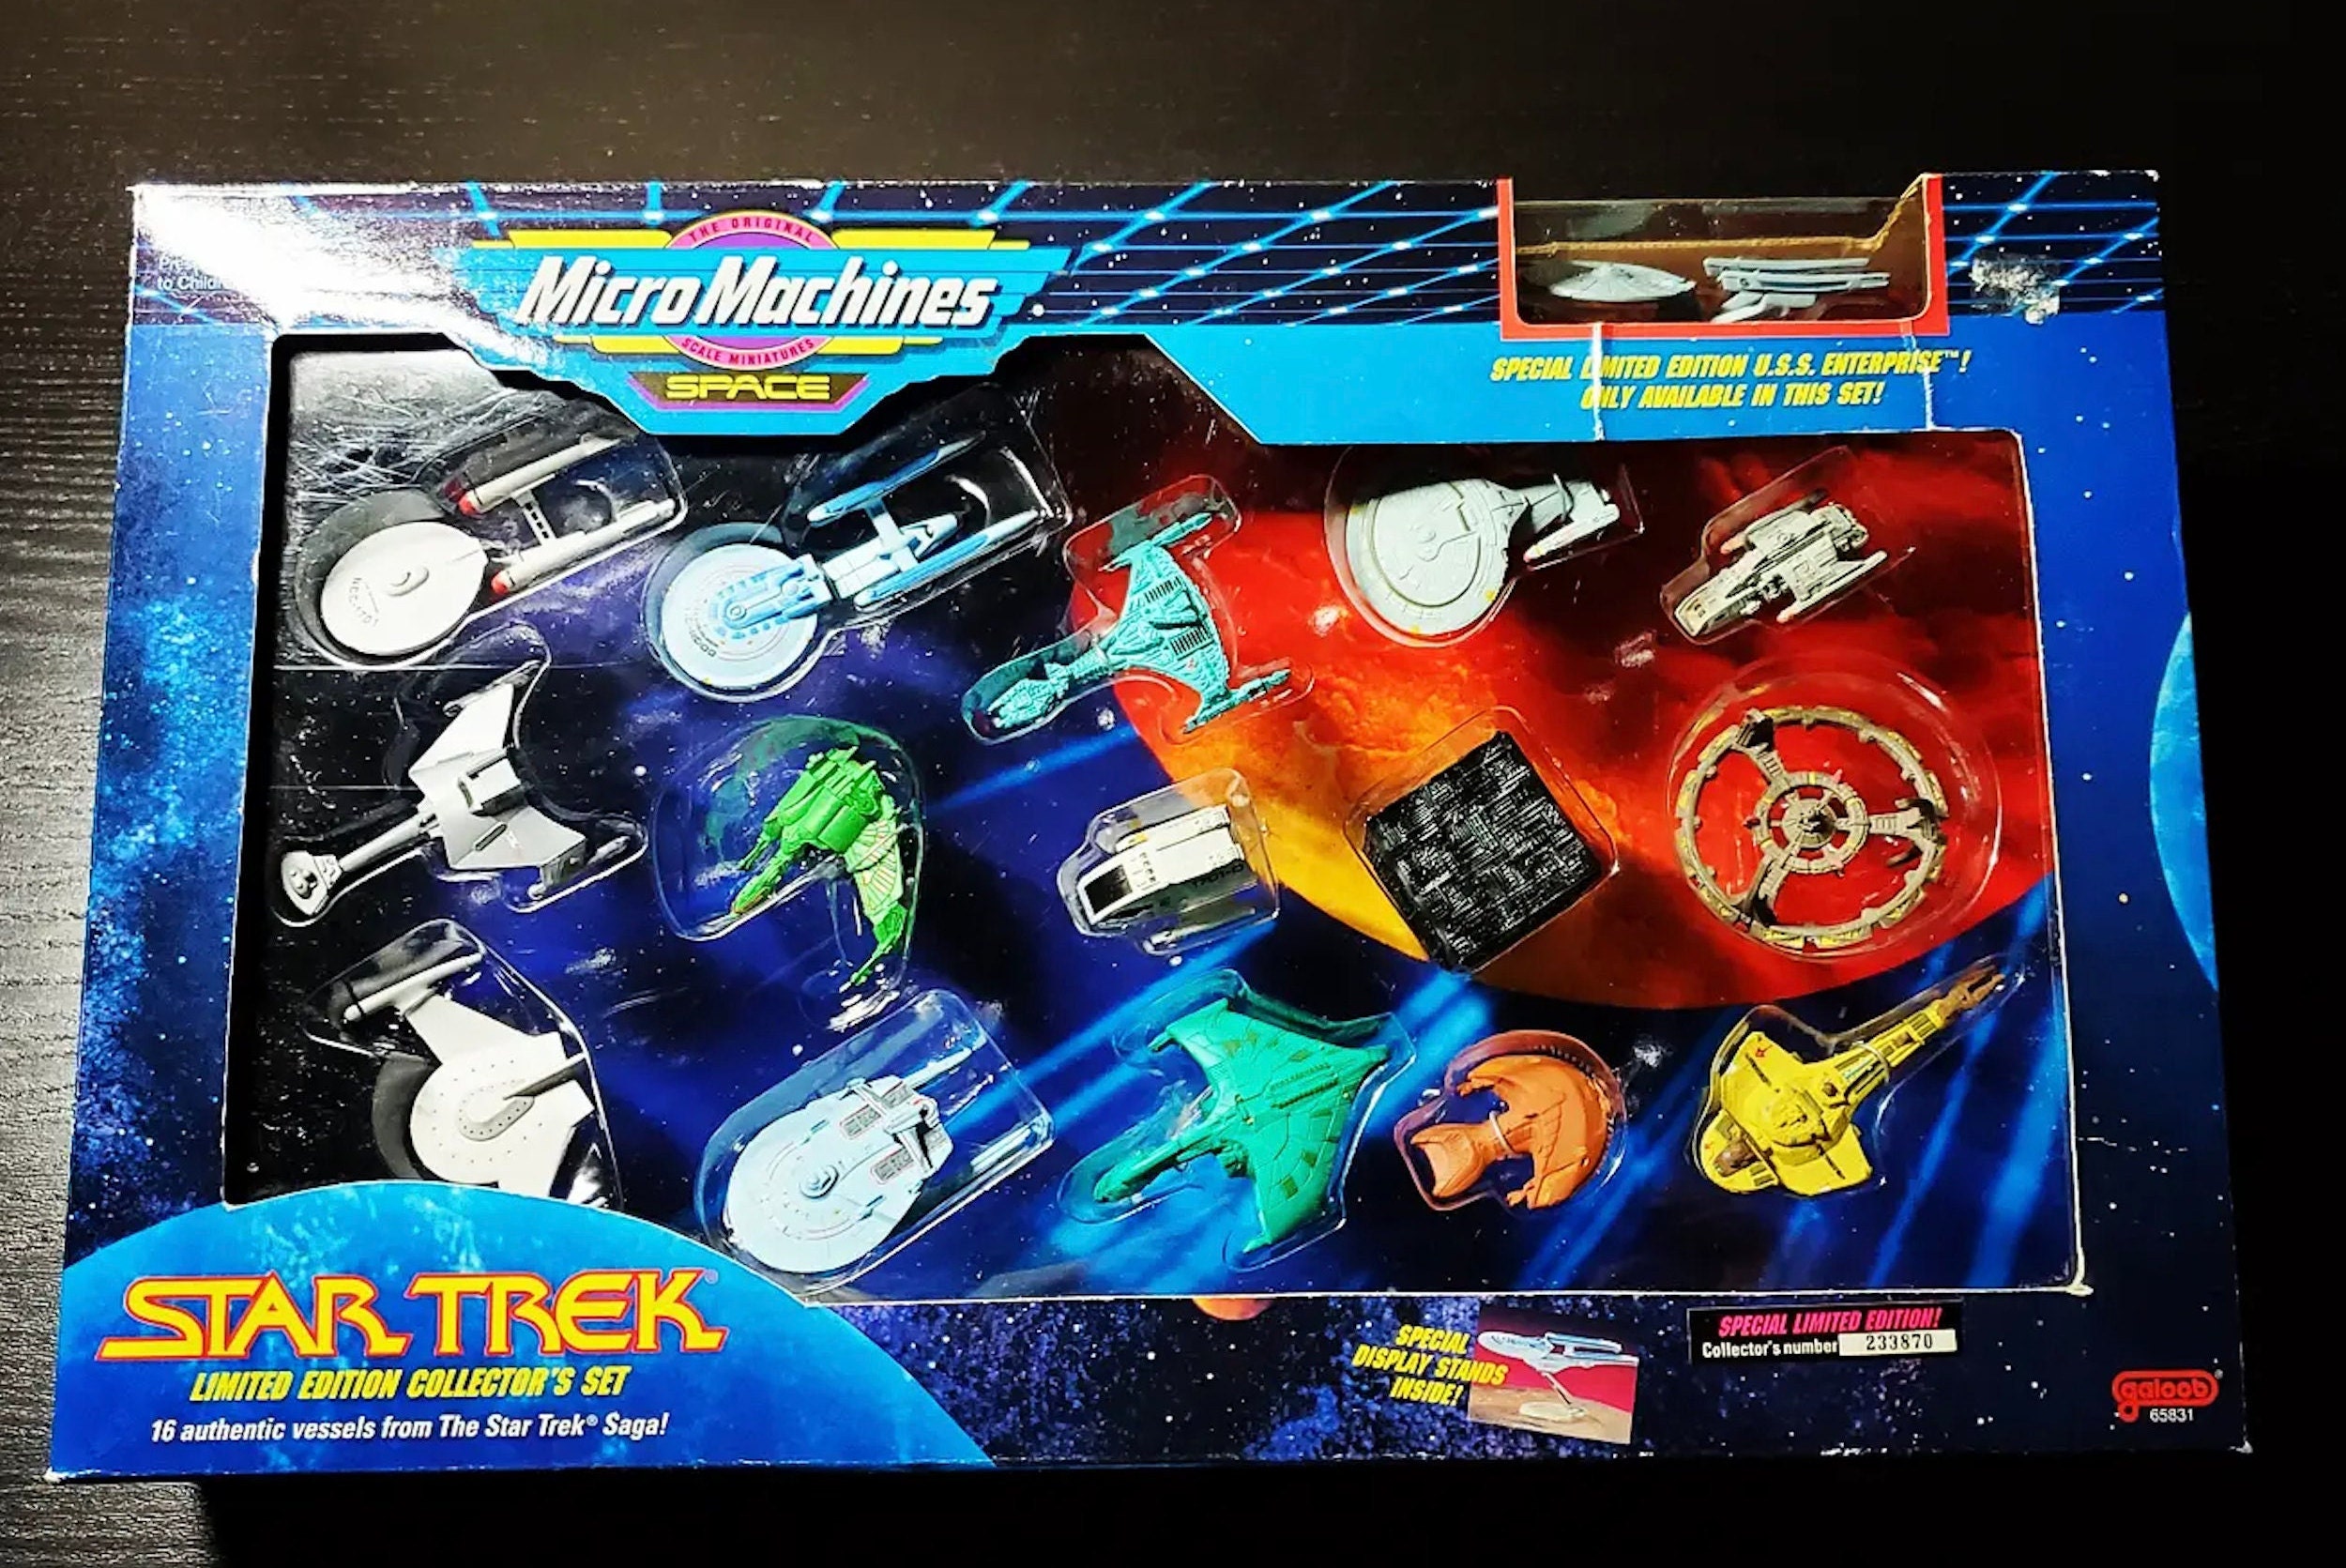 Micro Machines will be revived by toymaker Hasbro: small cars, trucks,  'Star Wars' and 'Star Trek' ships and other vehicles